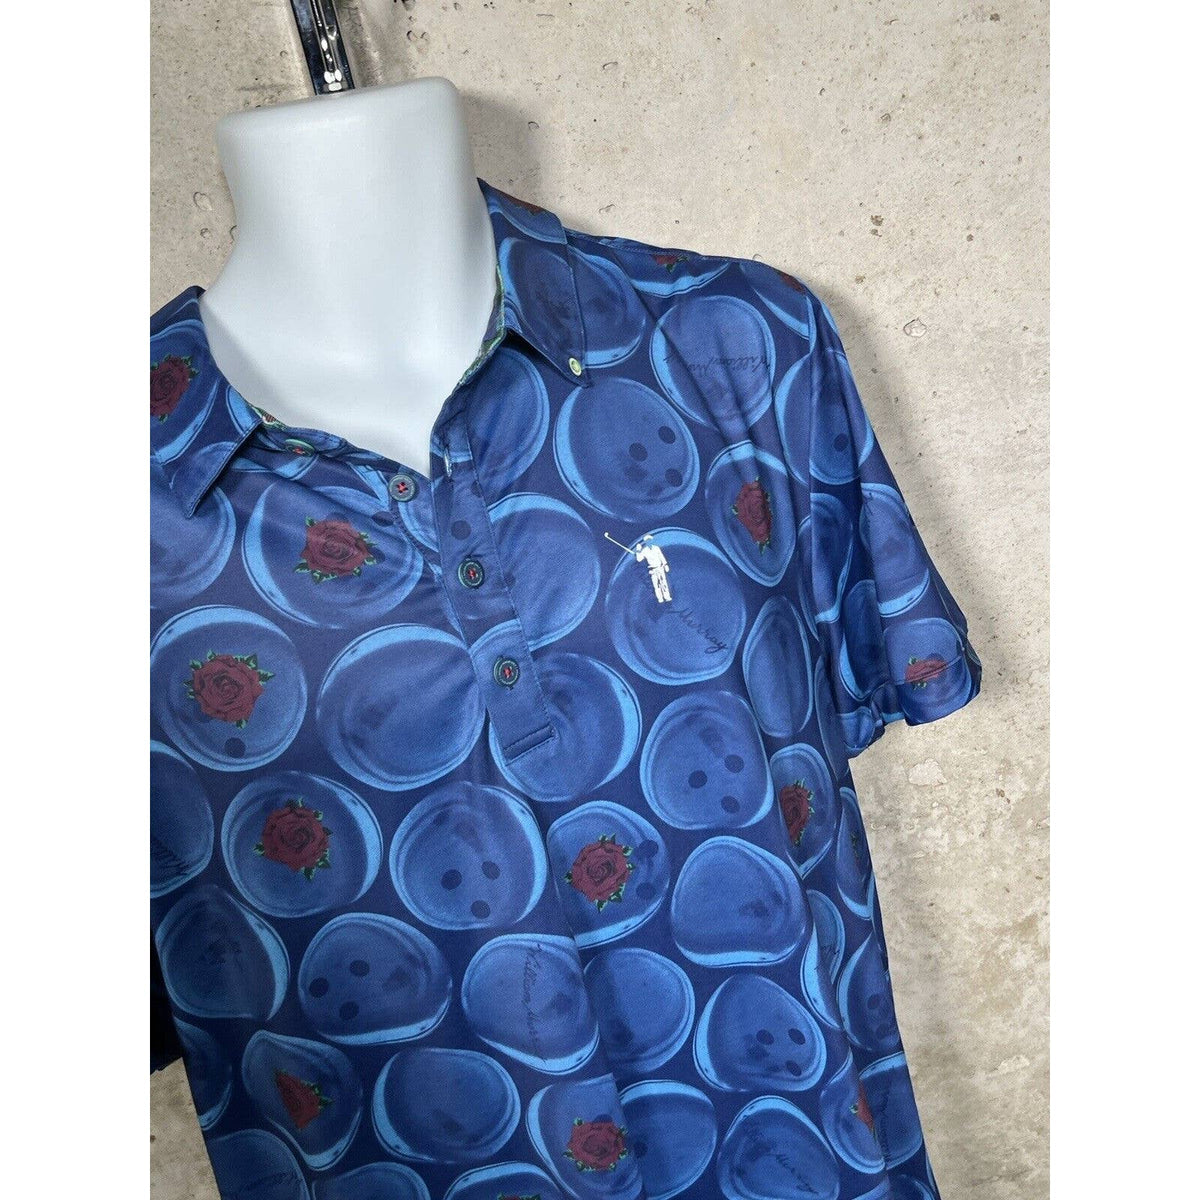 William Murray Golf Polo “Kingpin” Bowling Ball Roses Pattern Sz. Large